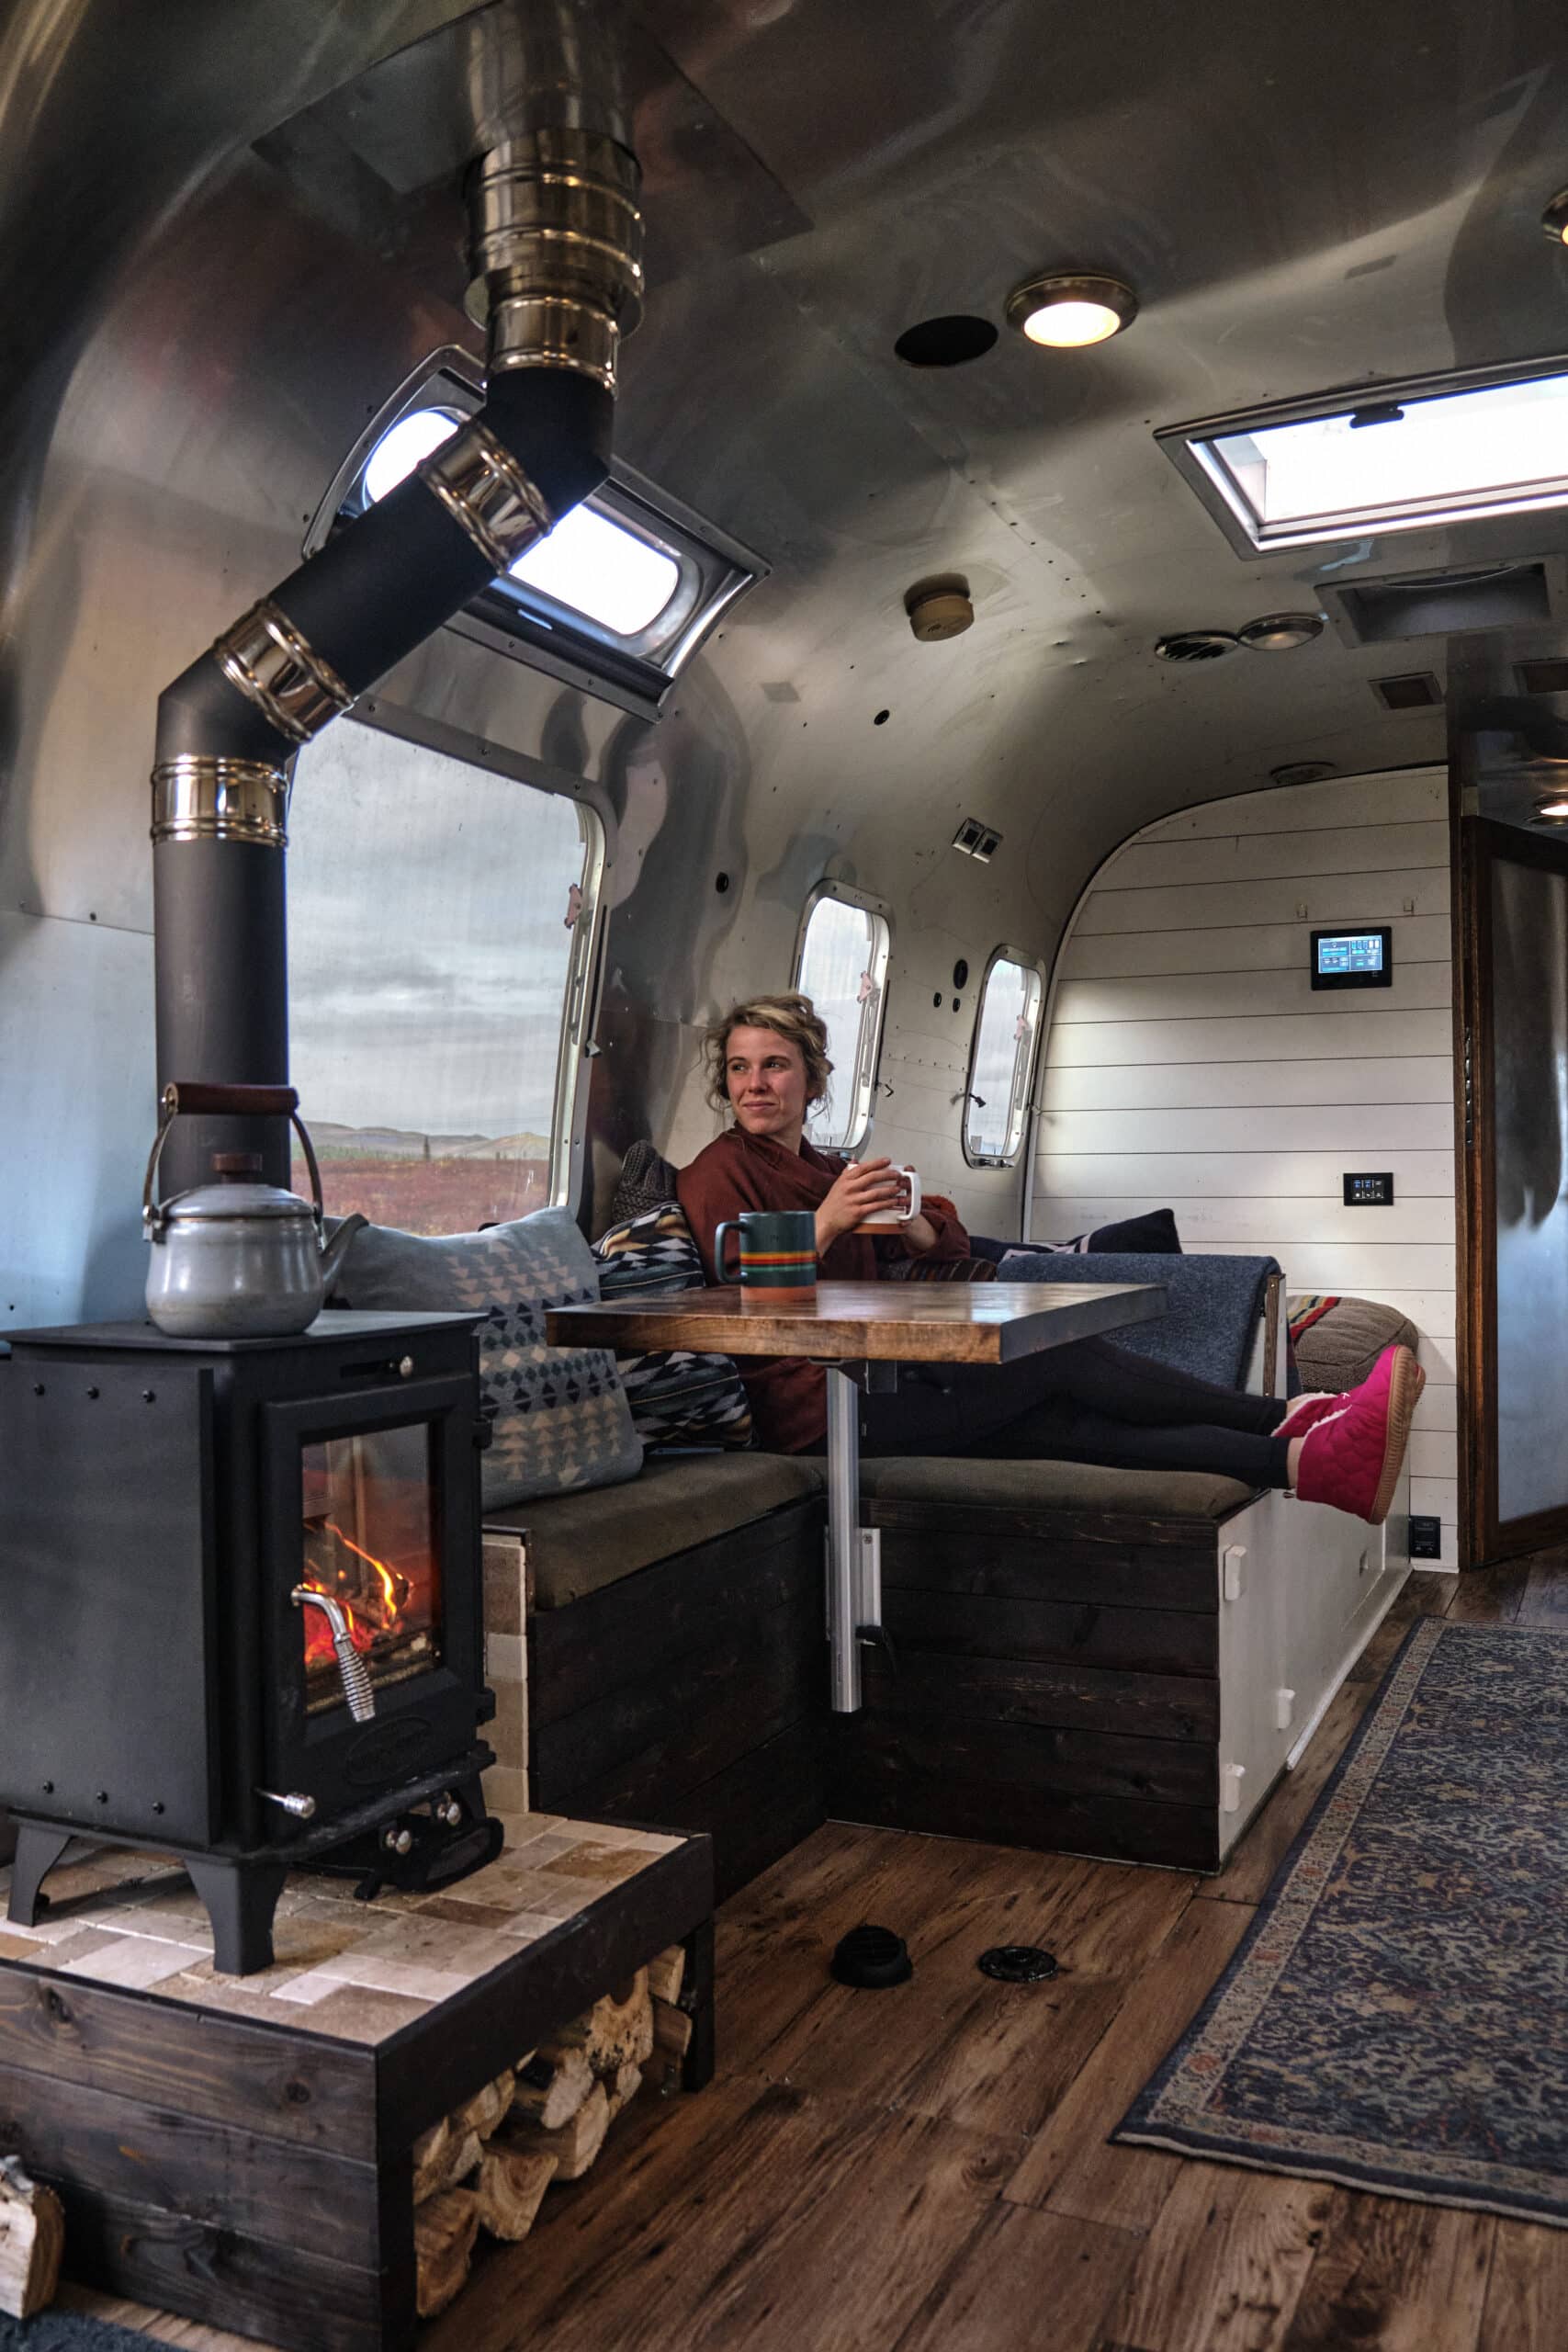 Kendall Strachan in the Living Area of Her Renovated Airstream with Wood Burning Stove Going